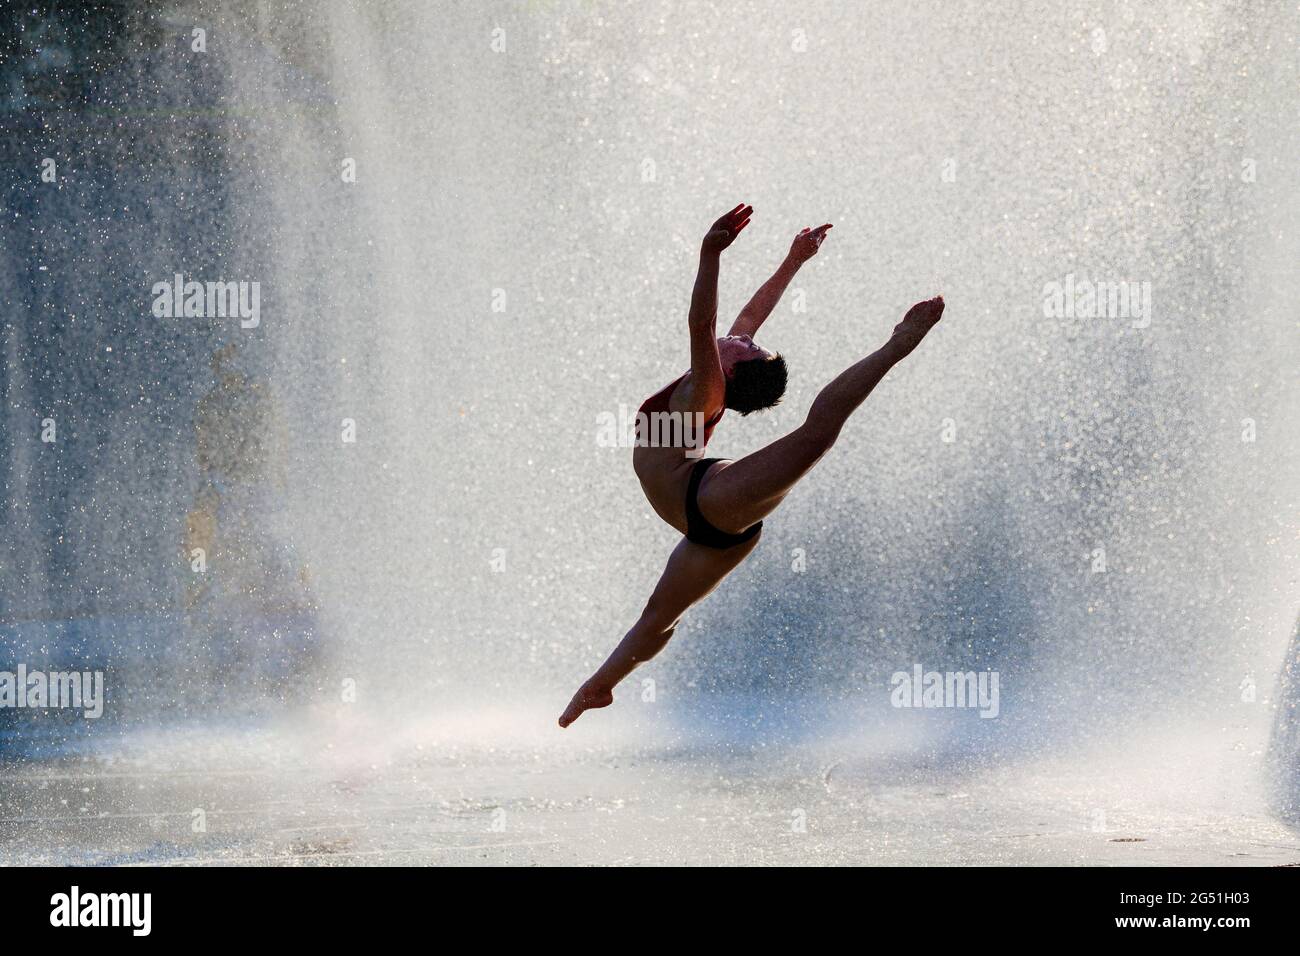 Silhouette of woman doing acrobatic jumping pose against fountain Stock Photo